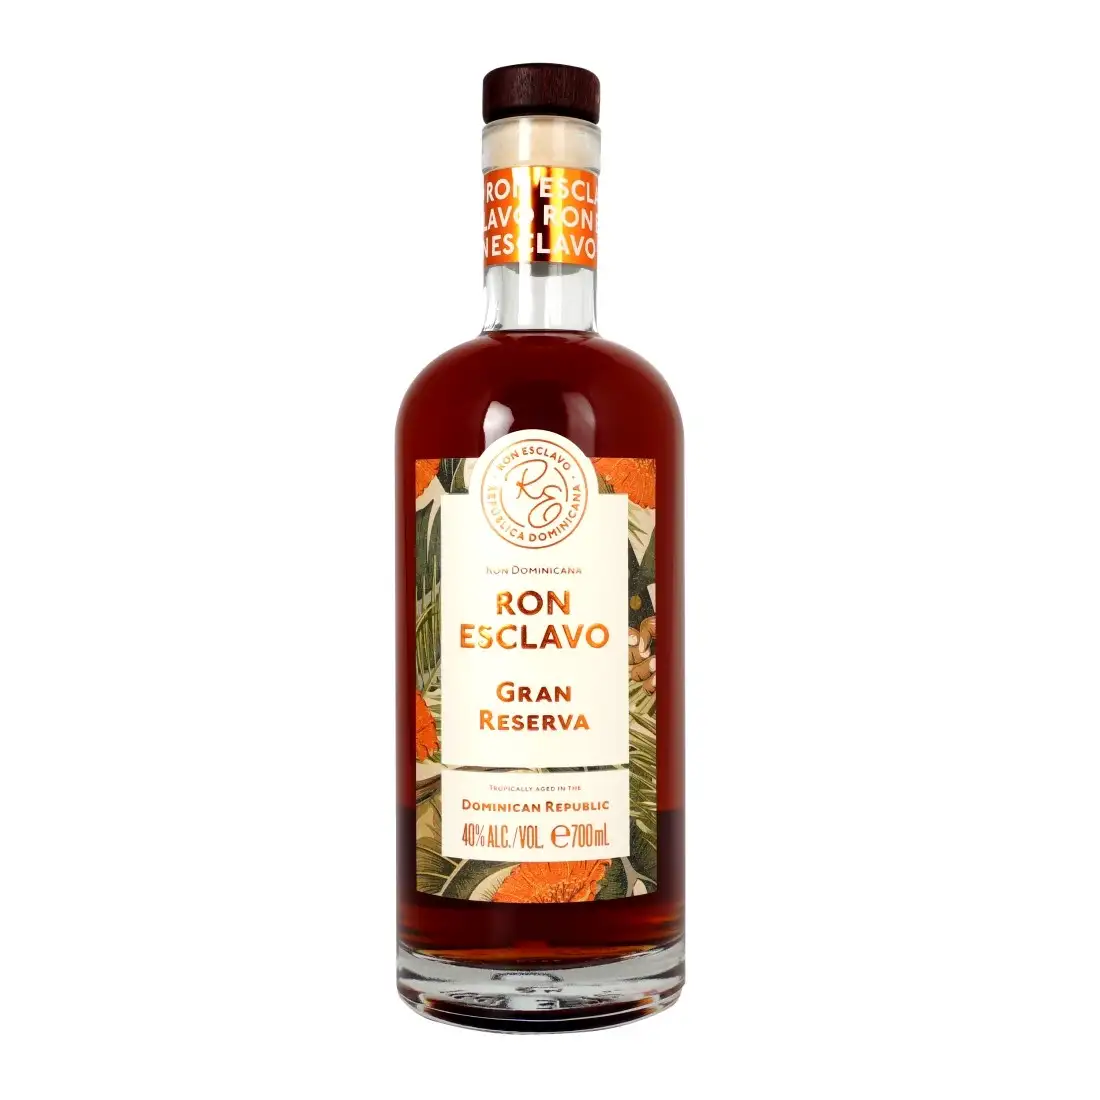 Image of the front of the bottle of the rum Ron Esclavo Gran Reserva